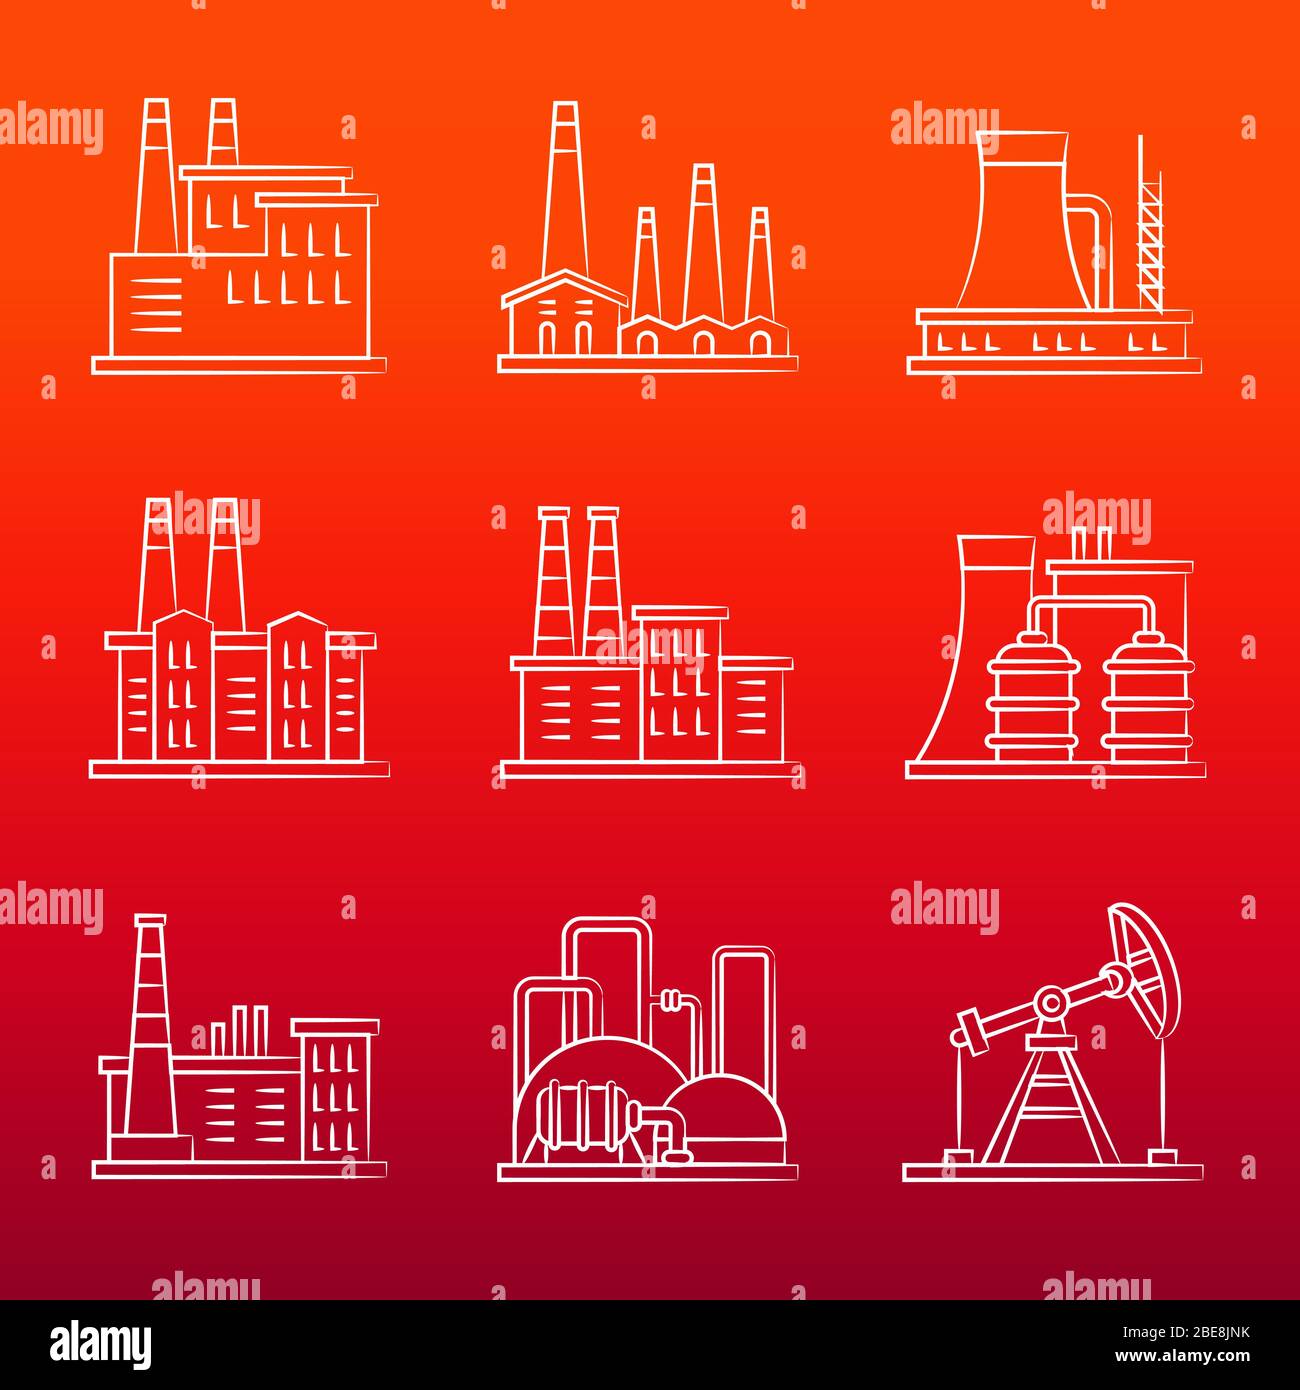 White industry powers line icons on colorful background. Vector illustration Stock Vector